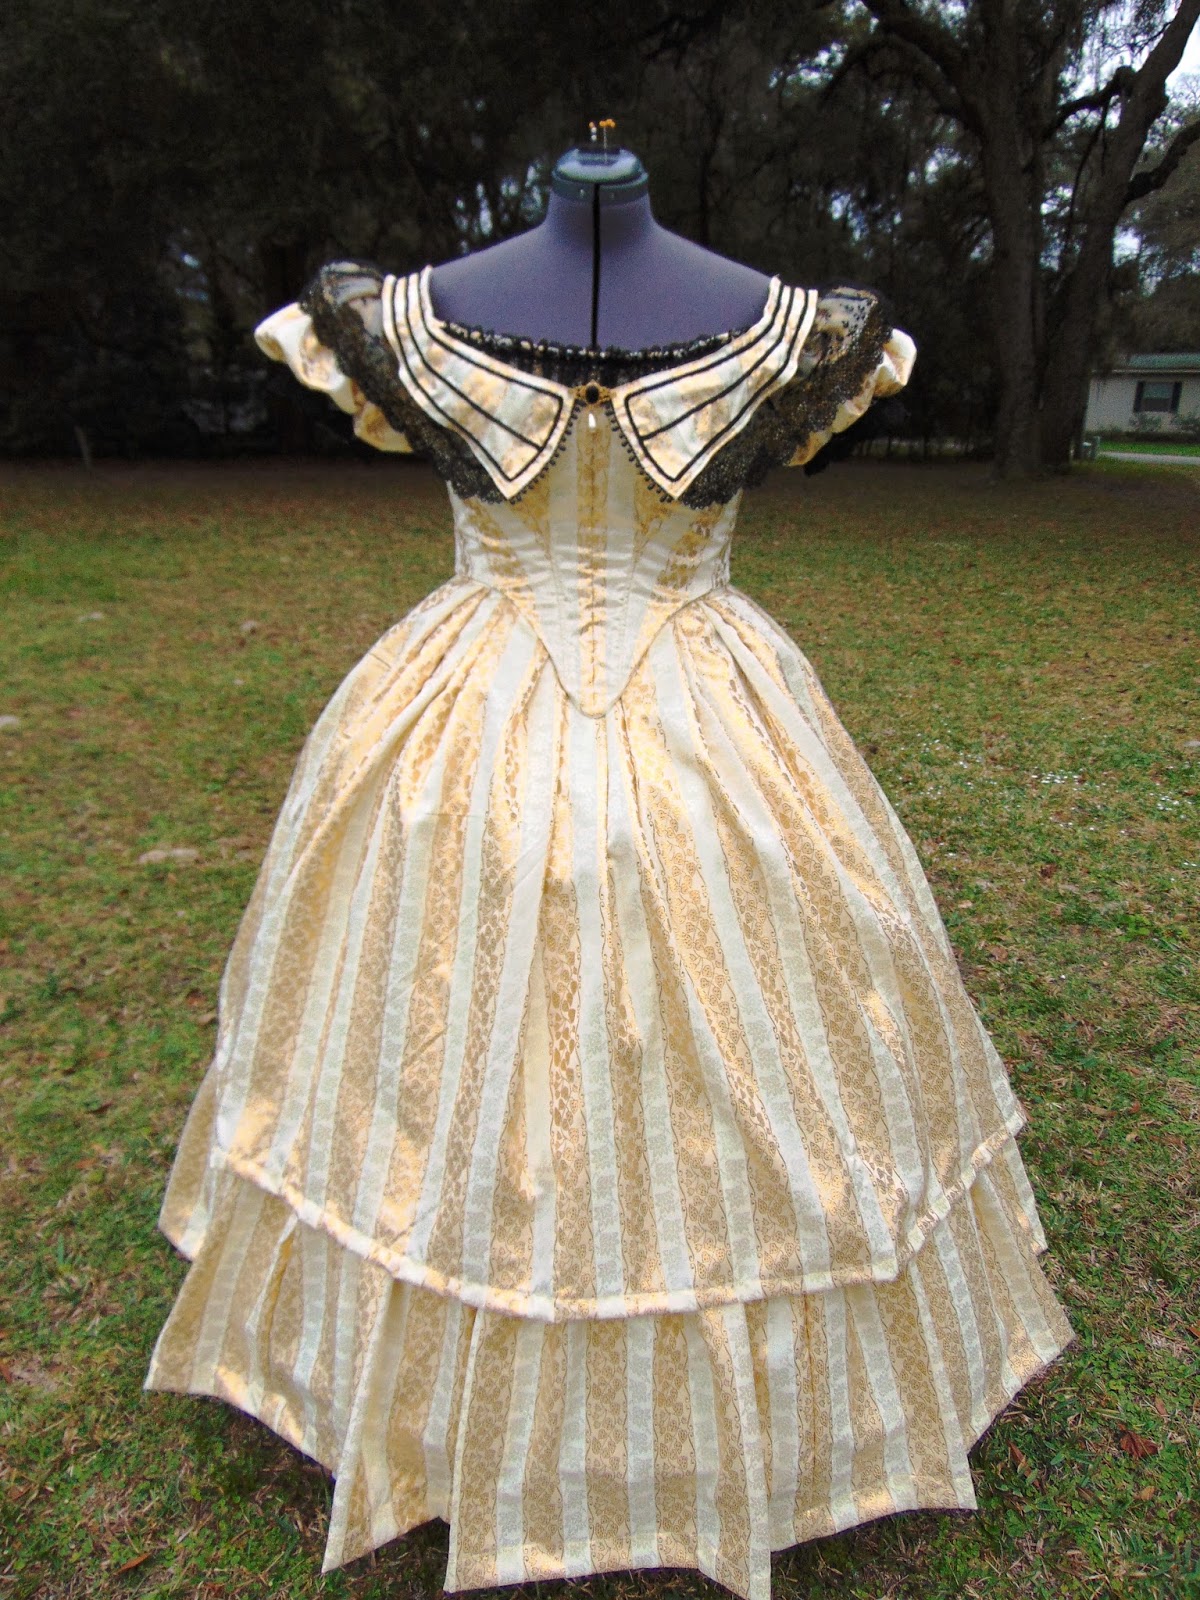 1850s ball gown